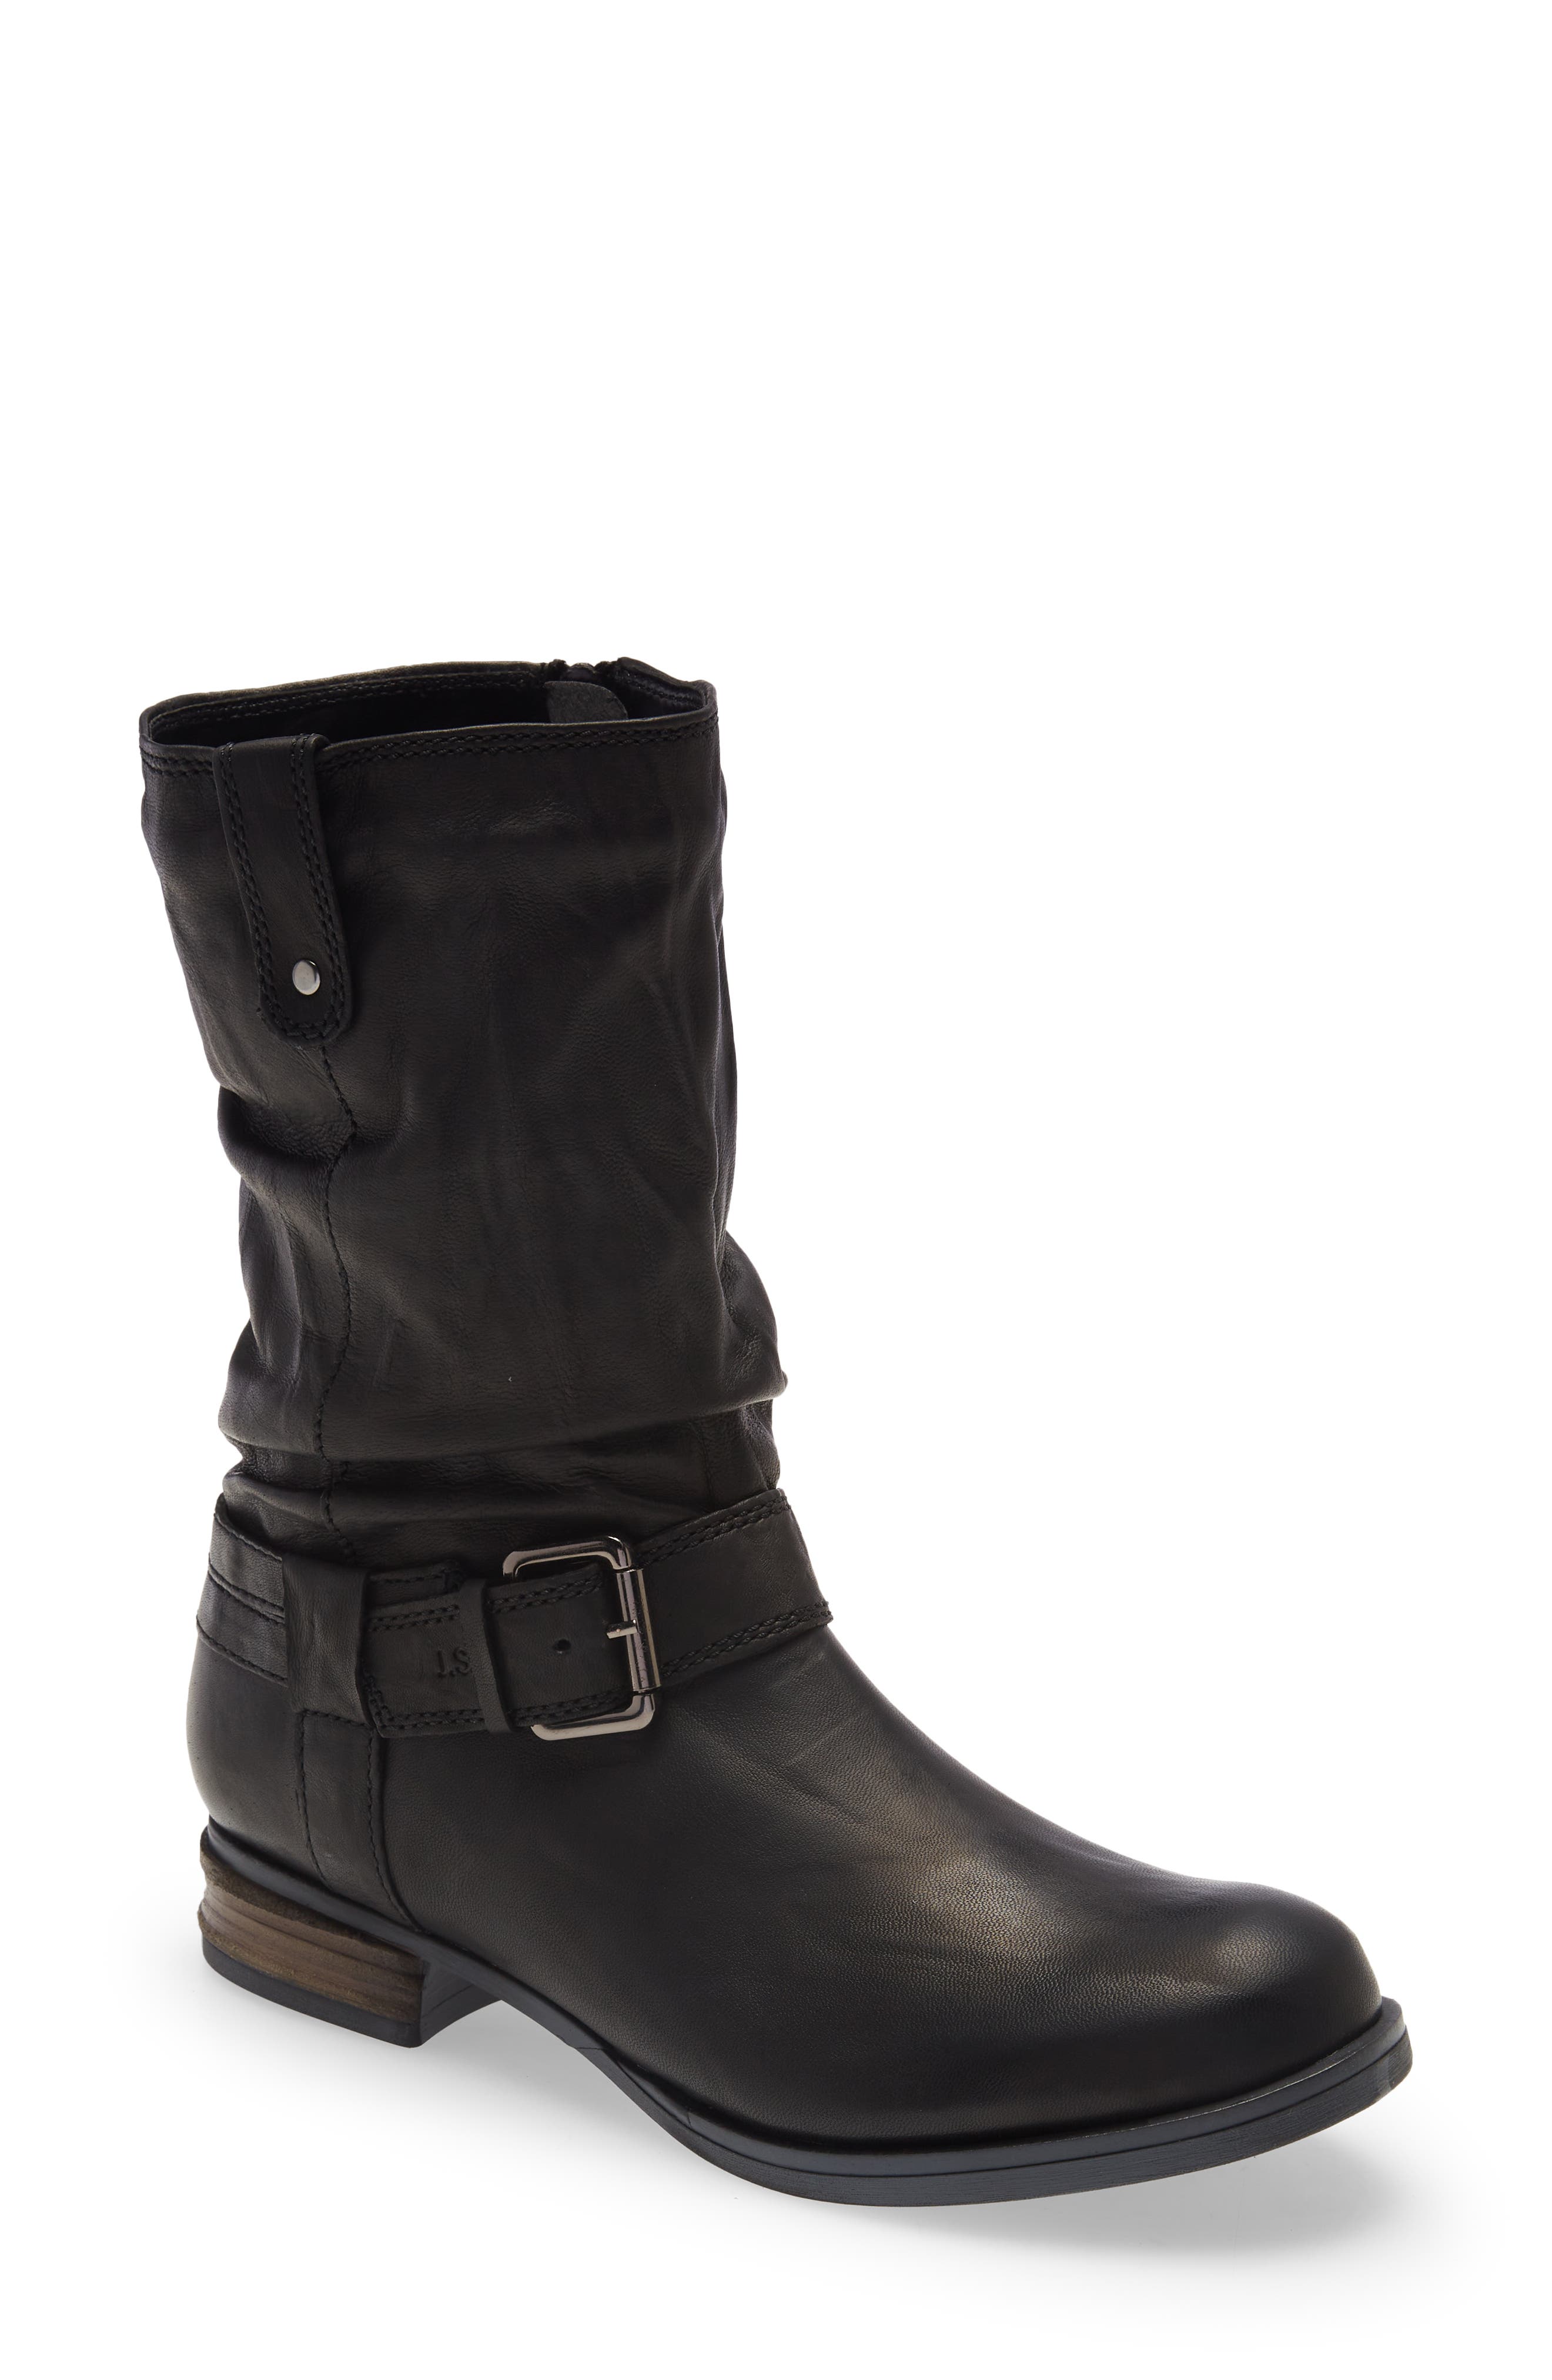 Details about   Josef Seibel Women Black Leather Square Toe Ankle Boots 